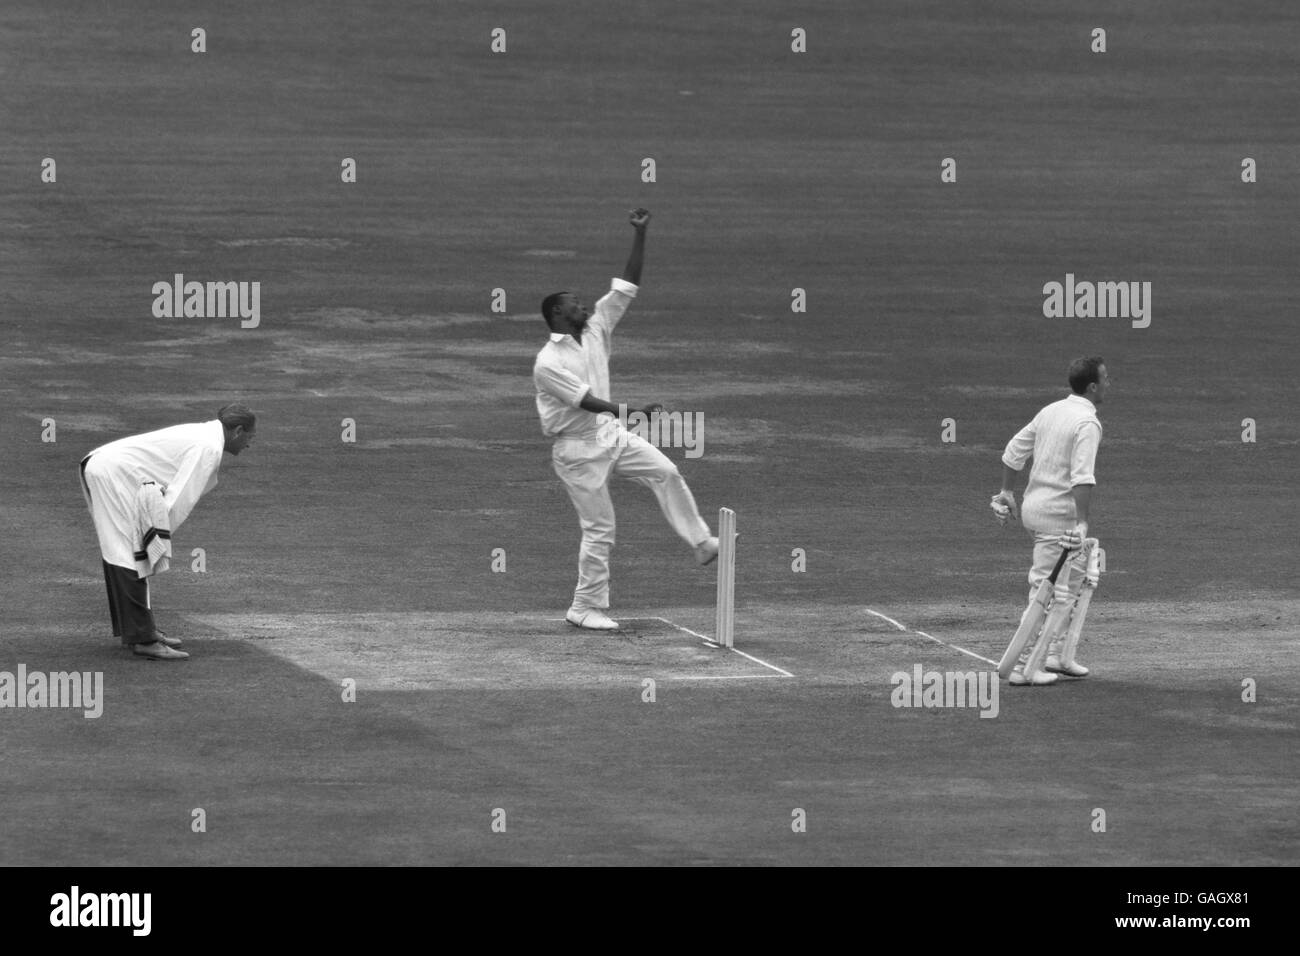 Cricket - Second Test Match - Fourth Day - England v West Indies - Lords Stock Photo